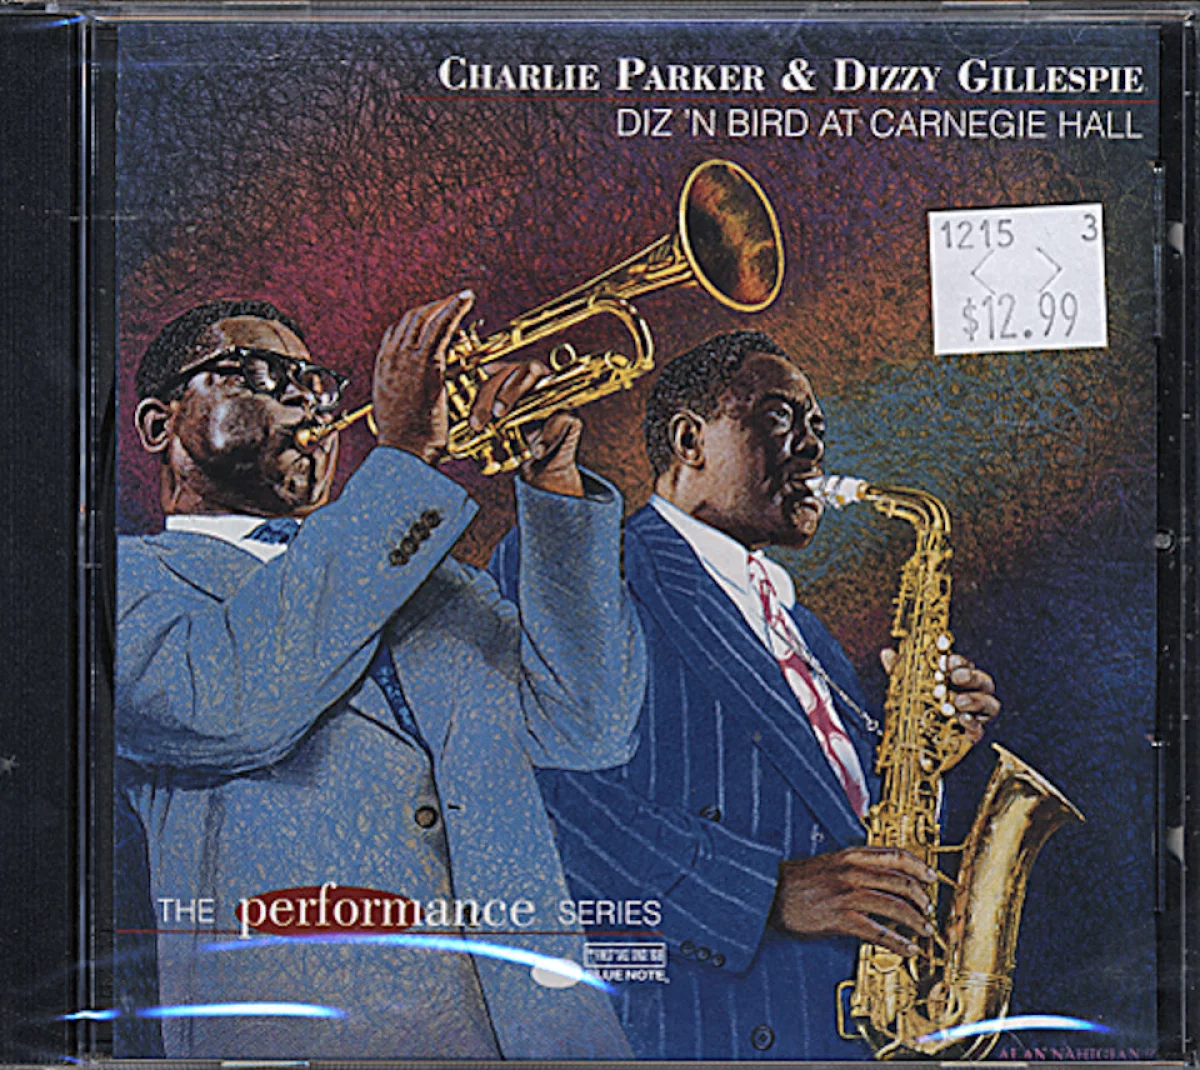 Charlie Parker & Dizzy Gillespie CD, 1997 at Wolfgang's